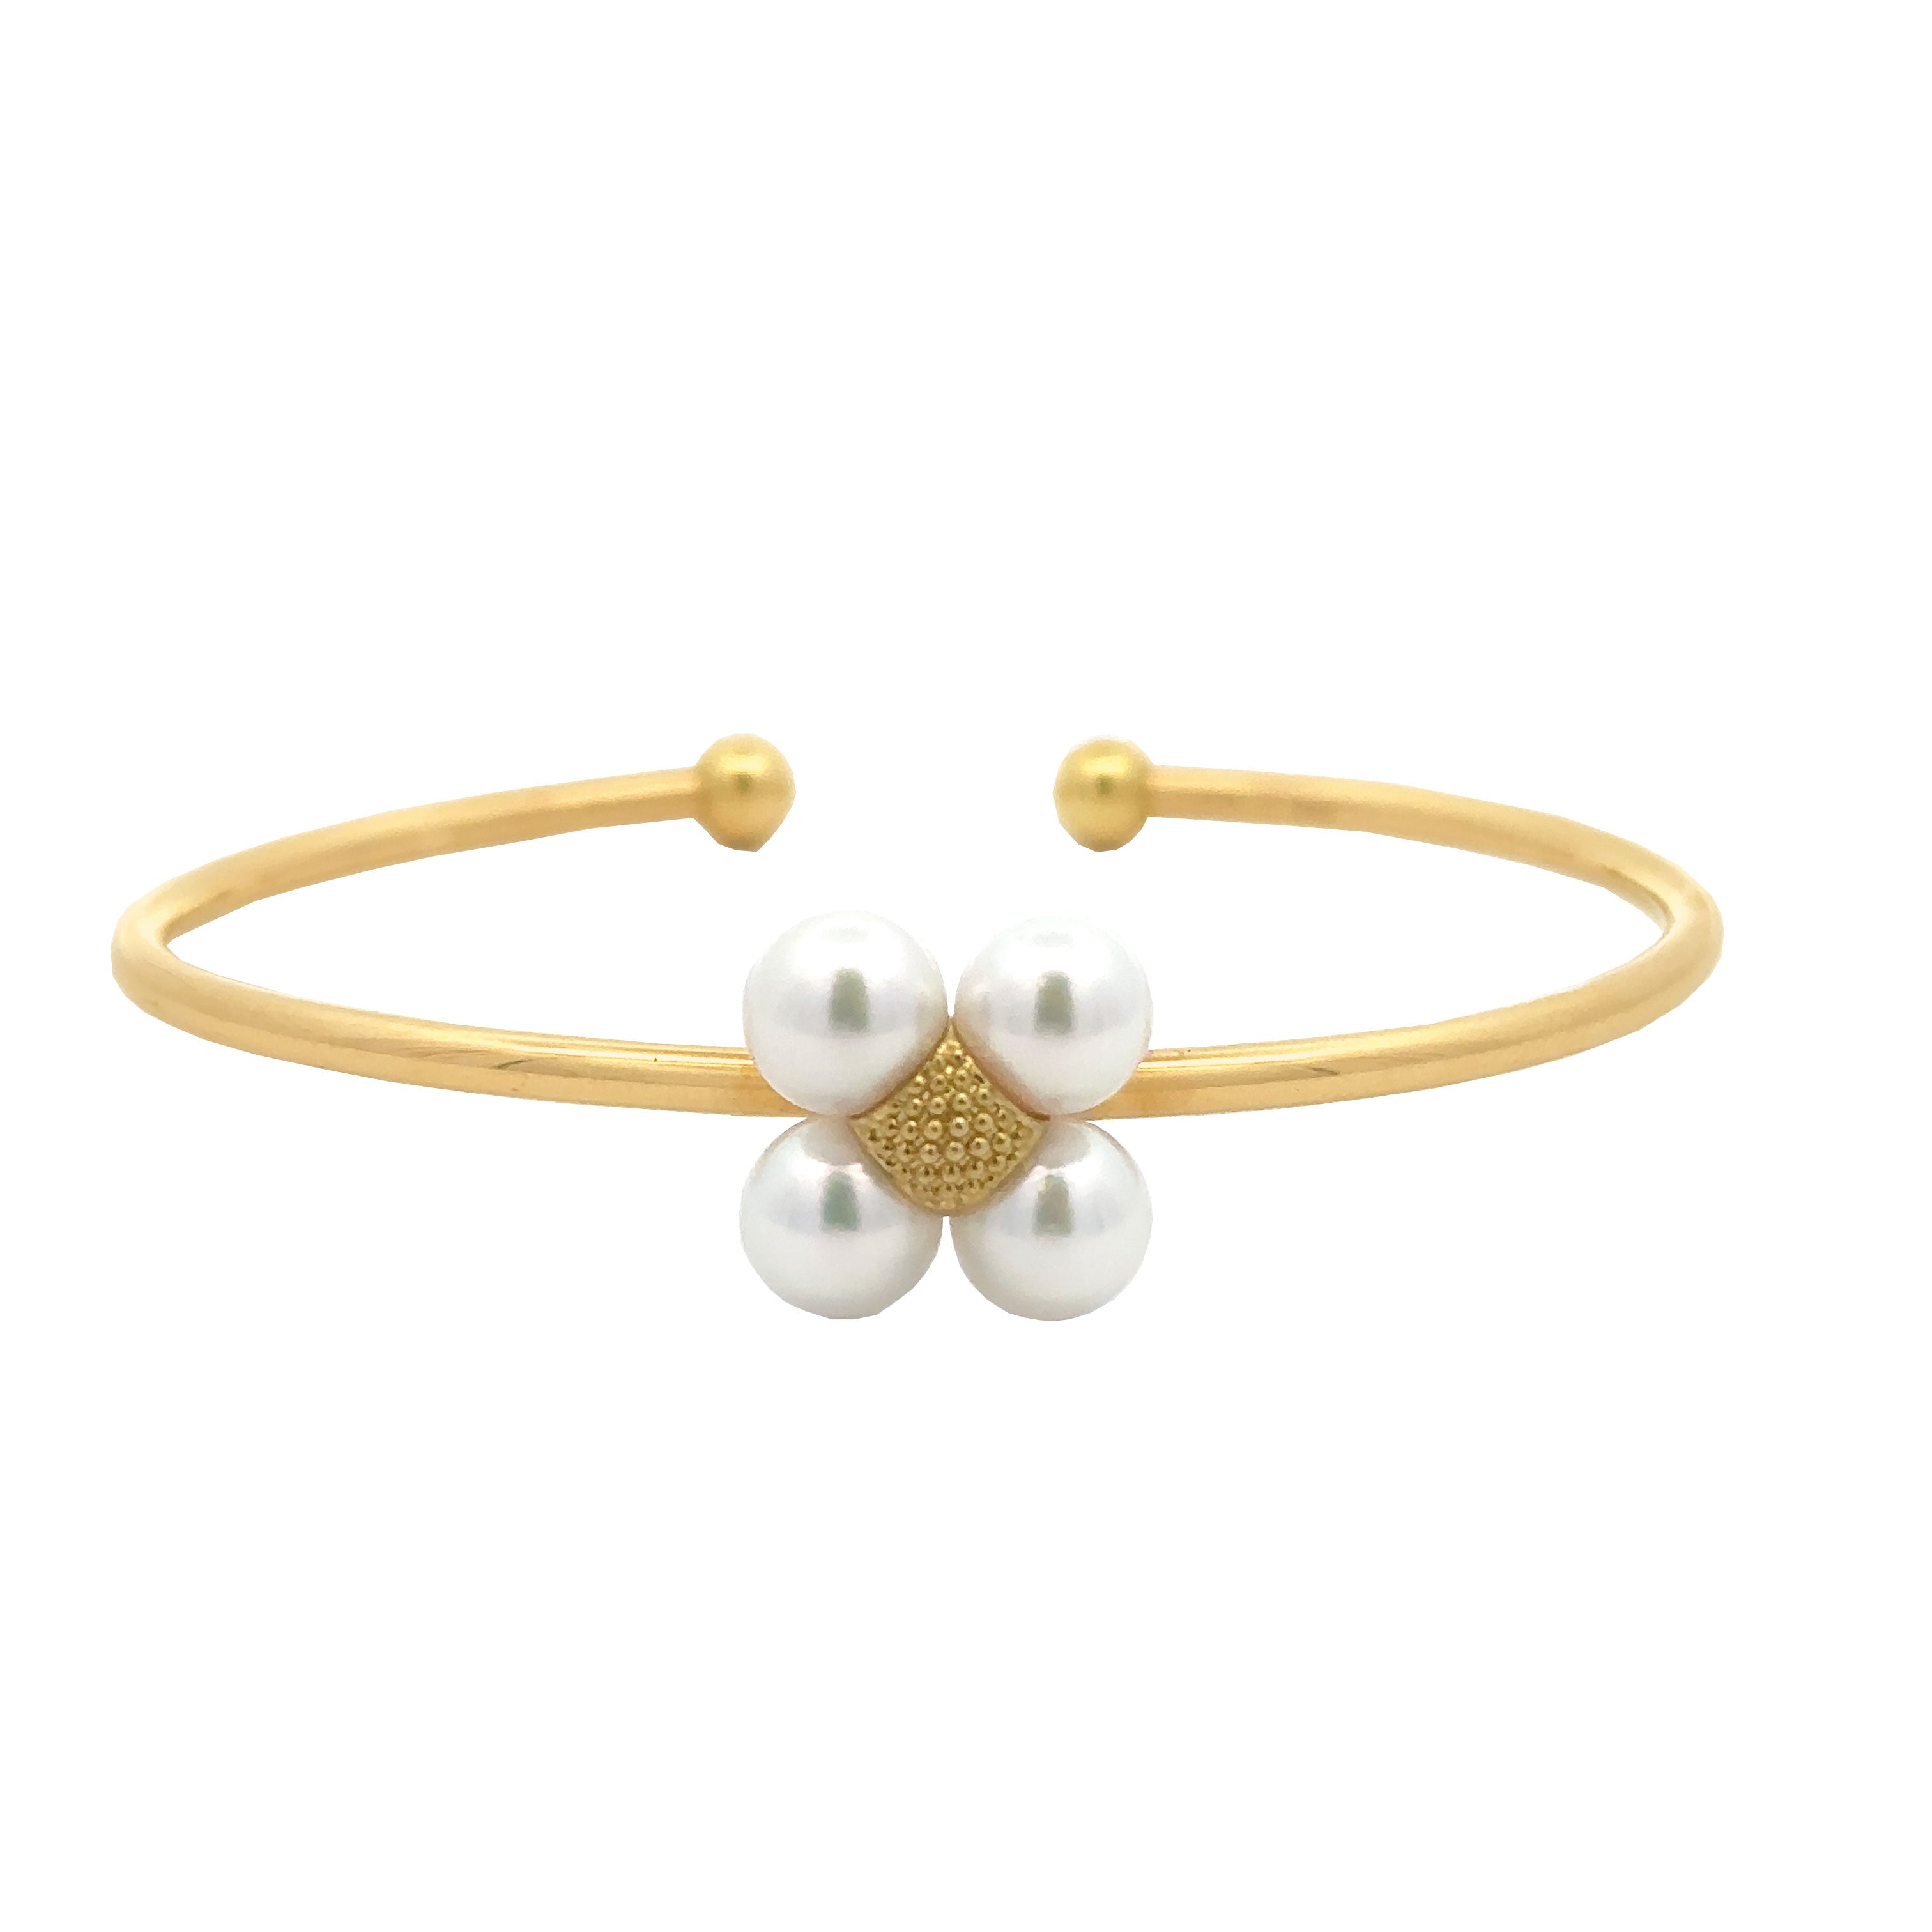 Paul Morelli Pearl Sequence Bracelet - Be On Park